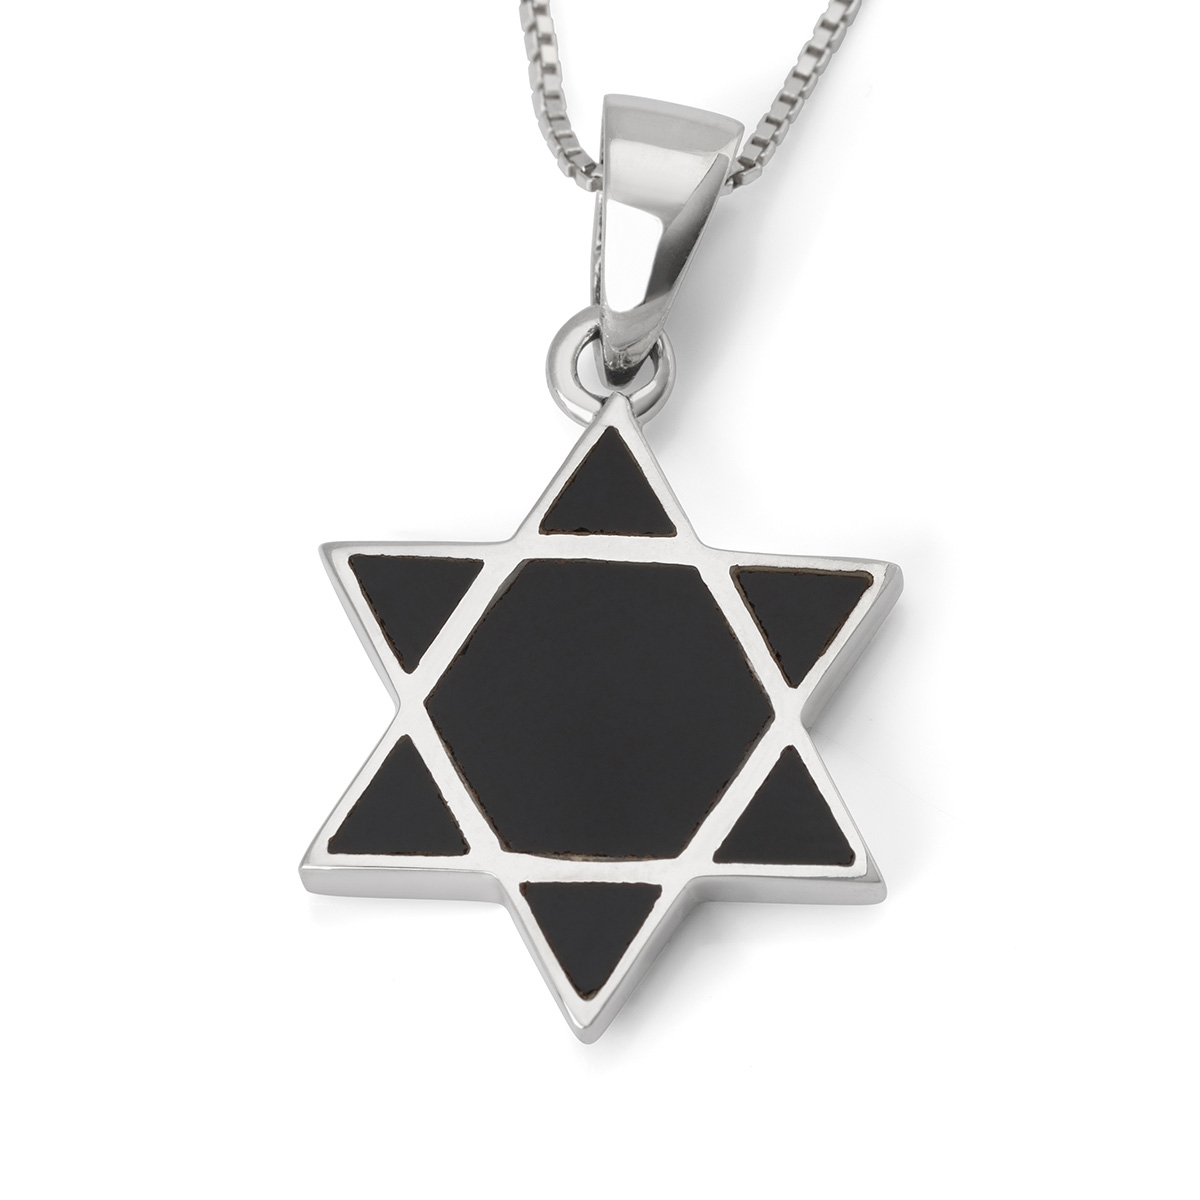 Contemporary Sterling Silver Star of David Pendant Necklace With Onyx Stone - 1